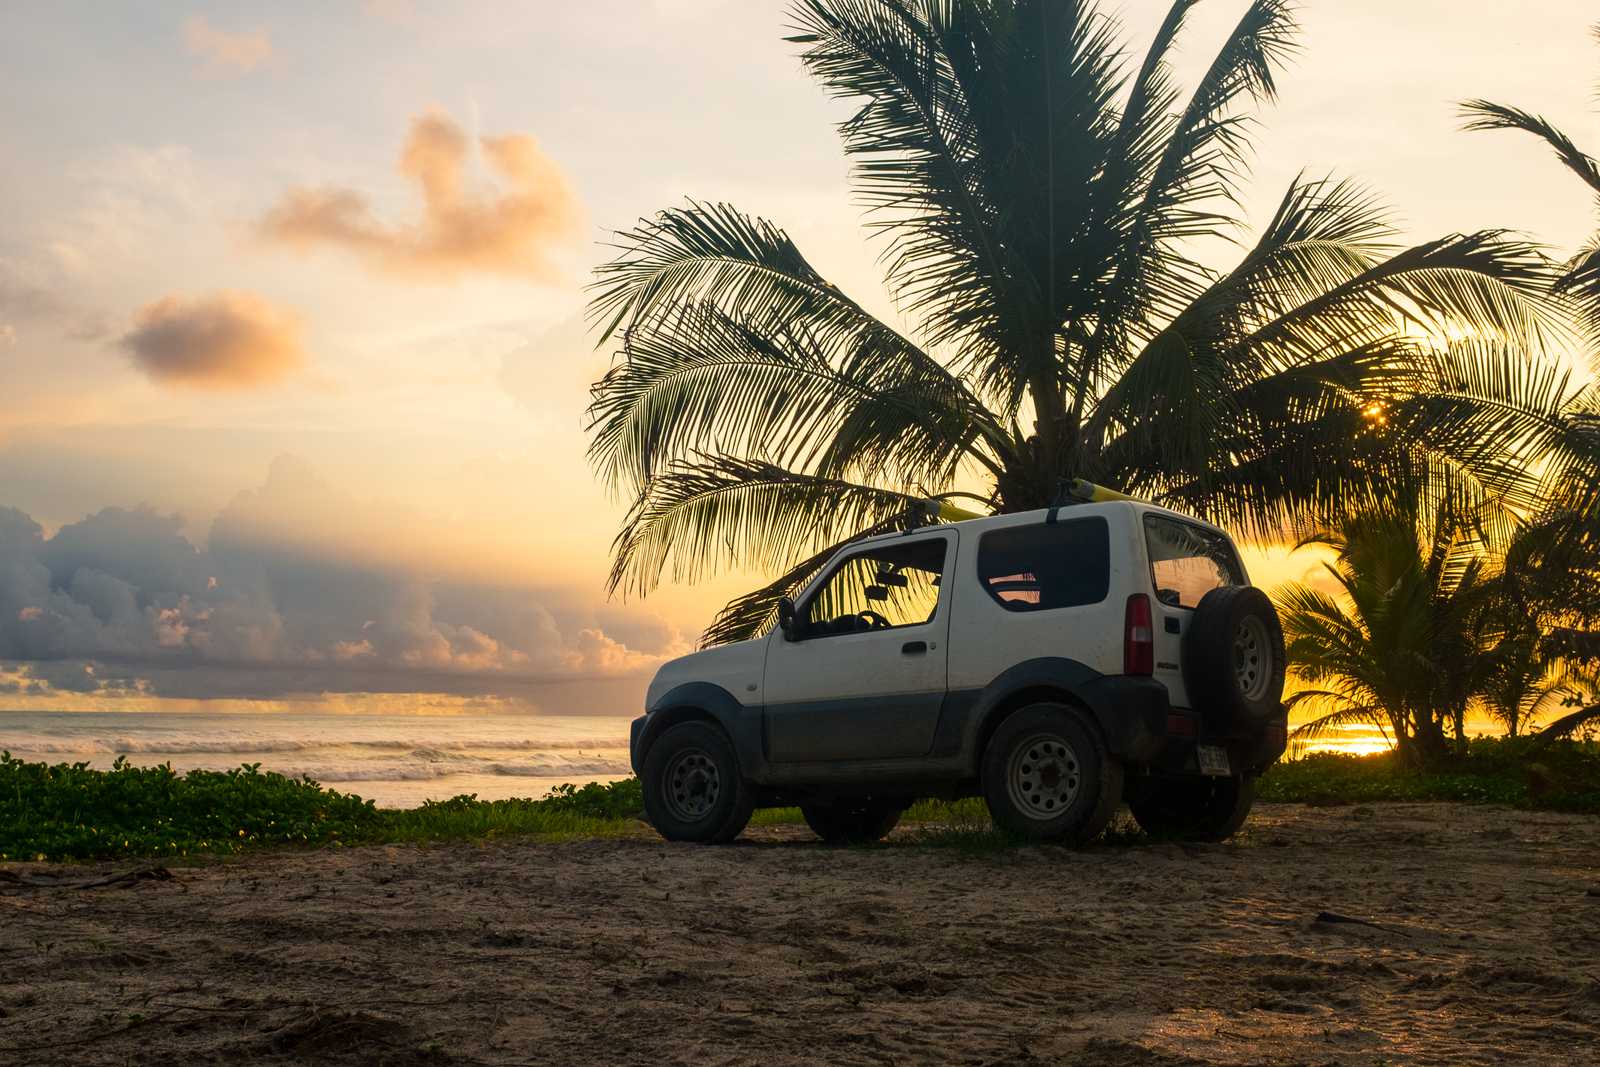 A suzuki car parked in front of the beach at sunset